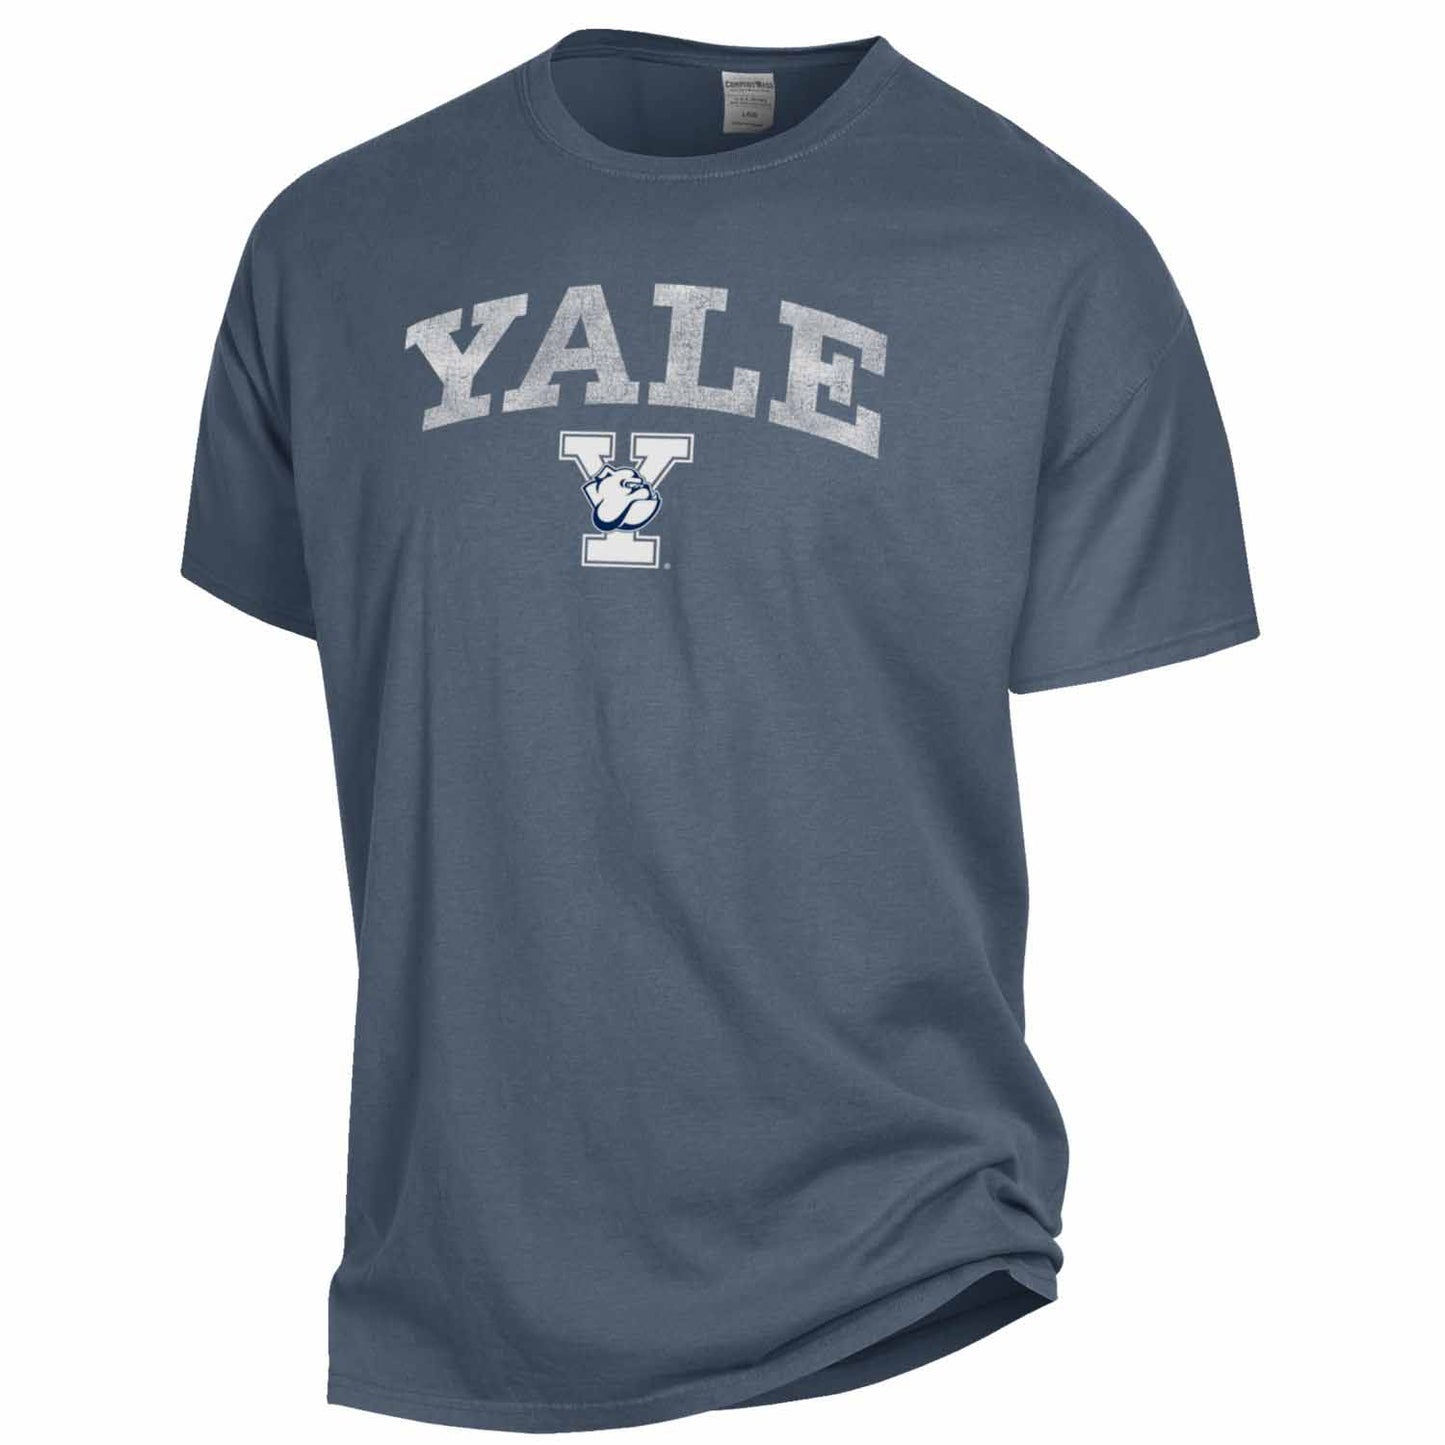 Yale Bulldogs Adult Ultra Soft Comfort Wash T-Shirt - Team Color